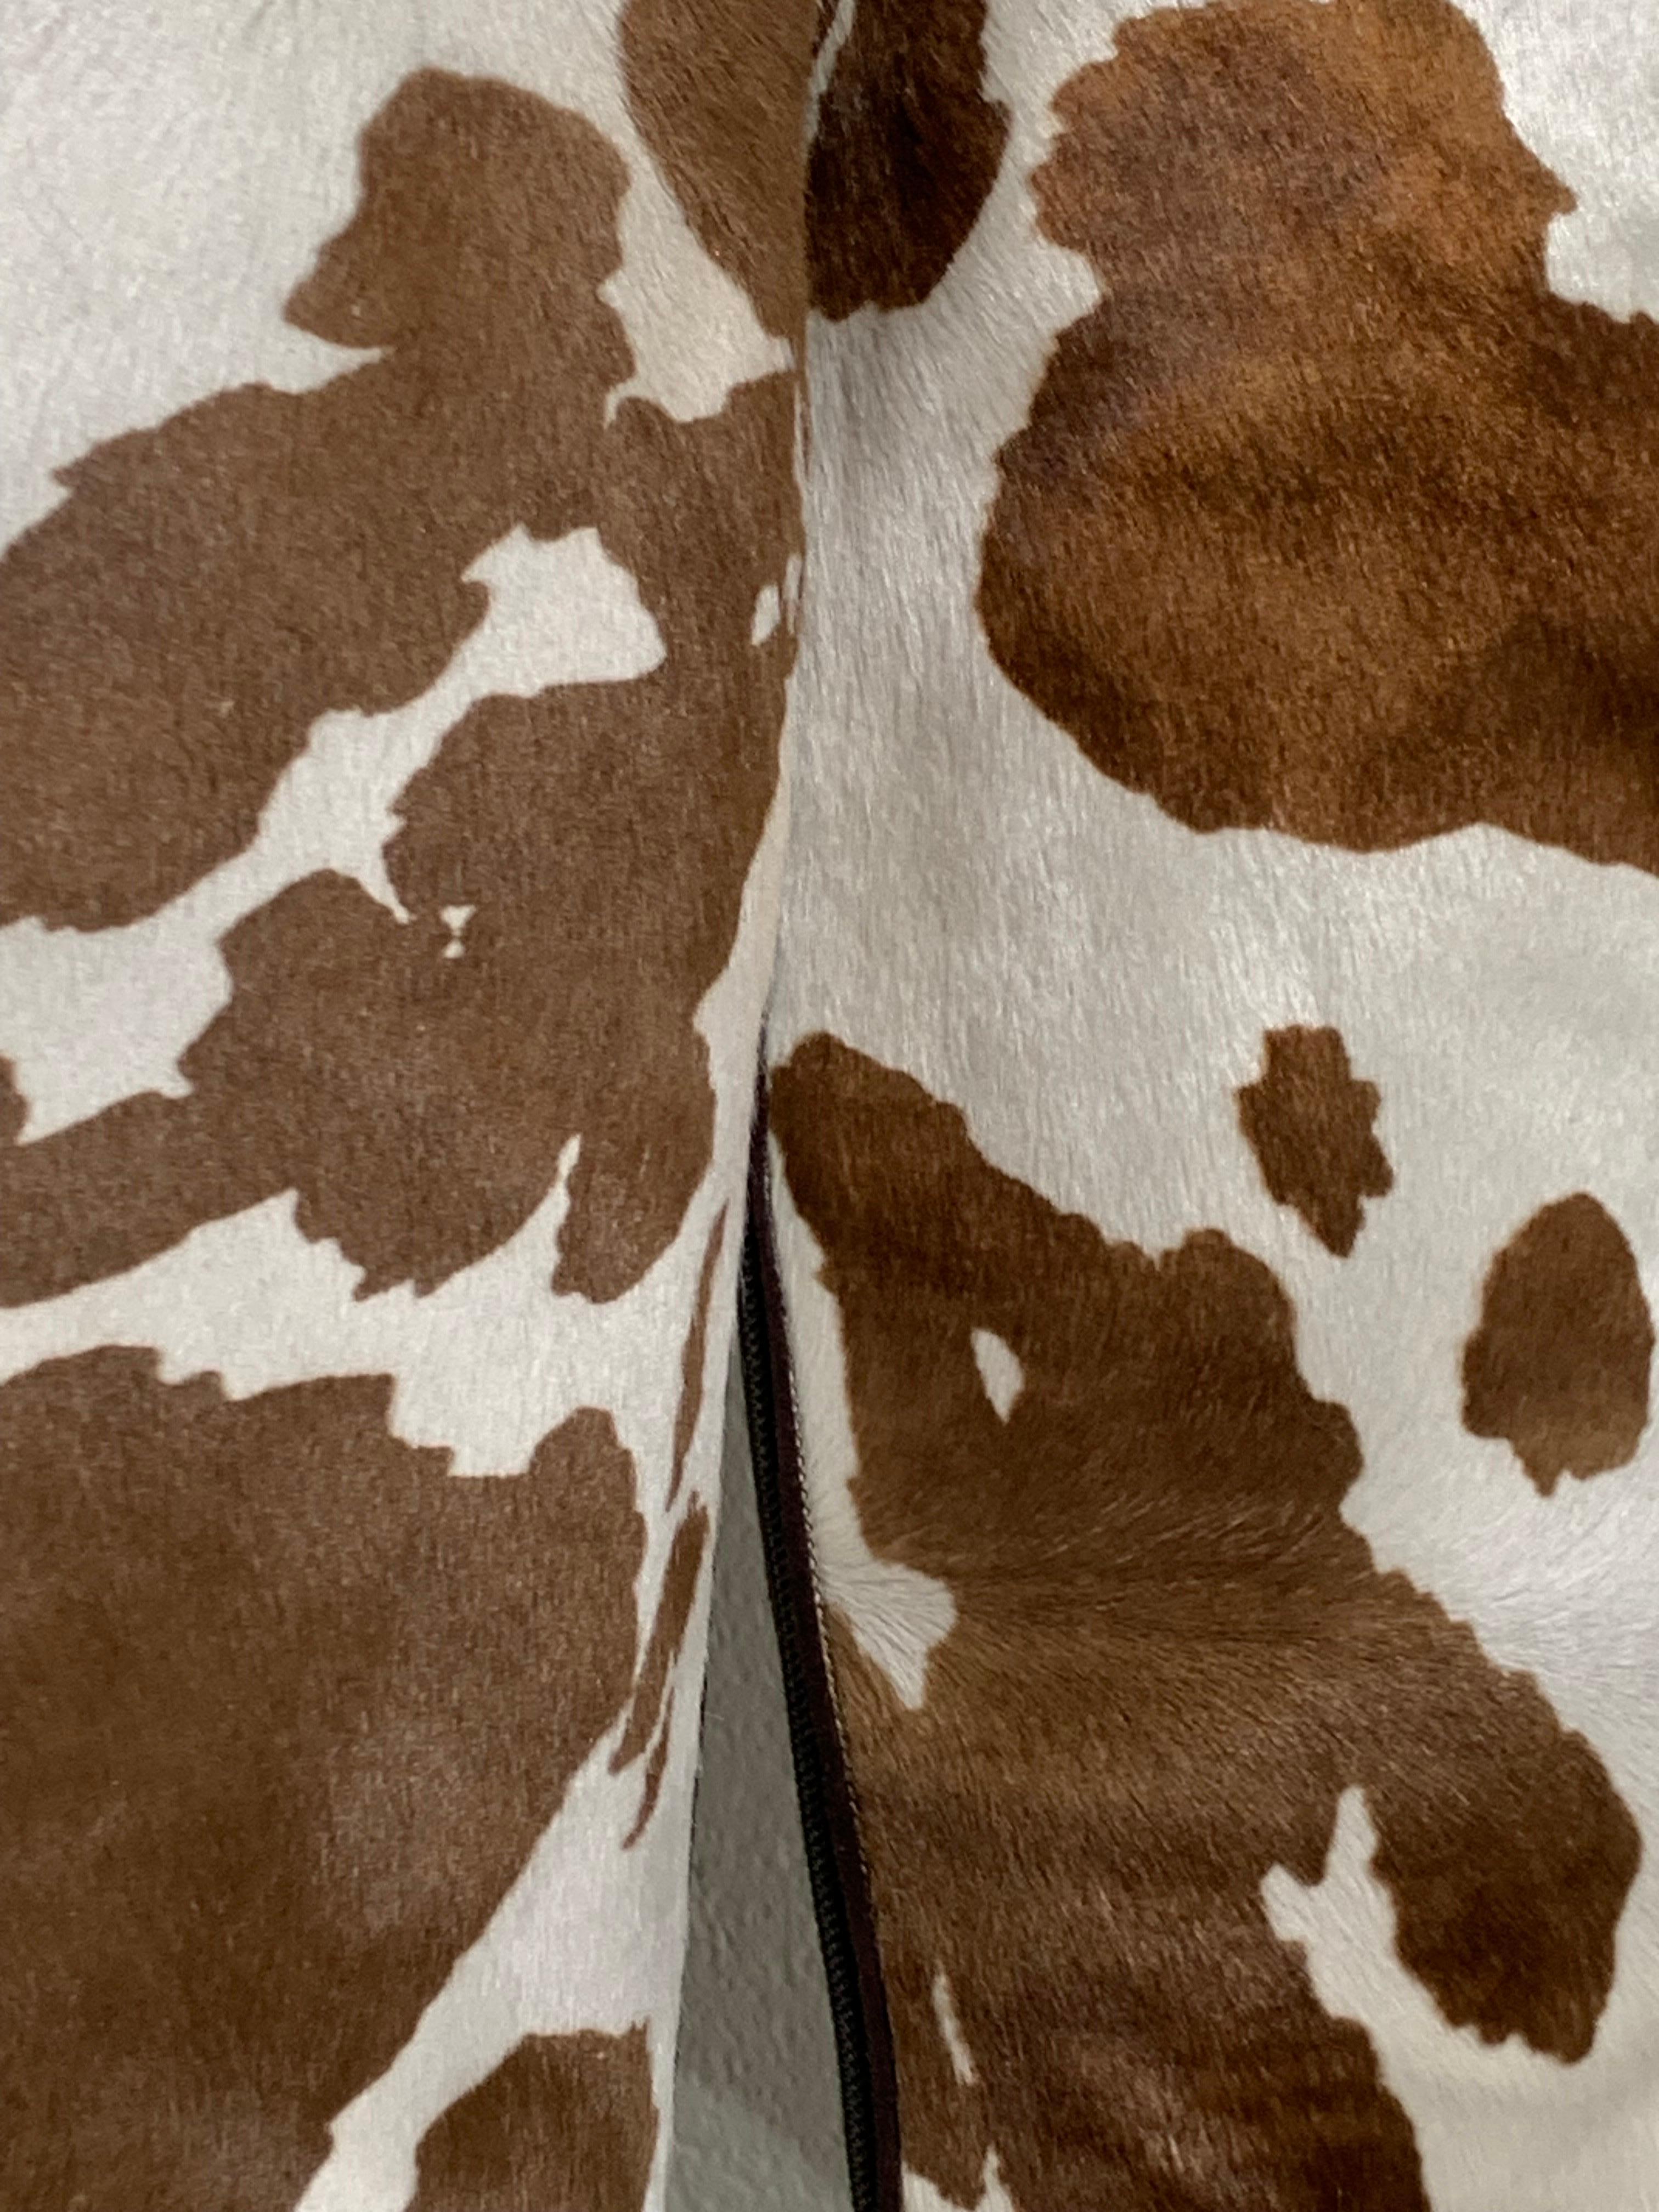 Manolo Blahnik Brown & White Cow Print Leather Knee-High Stiletto Heel Boots For Sale 3